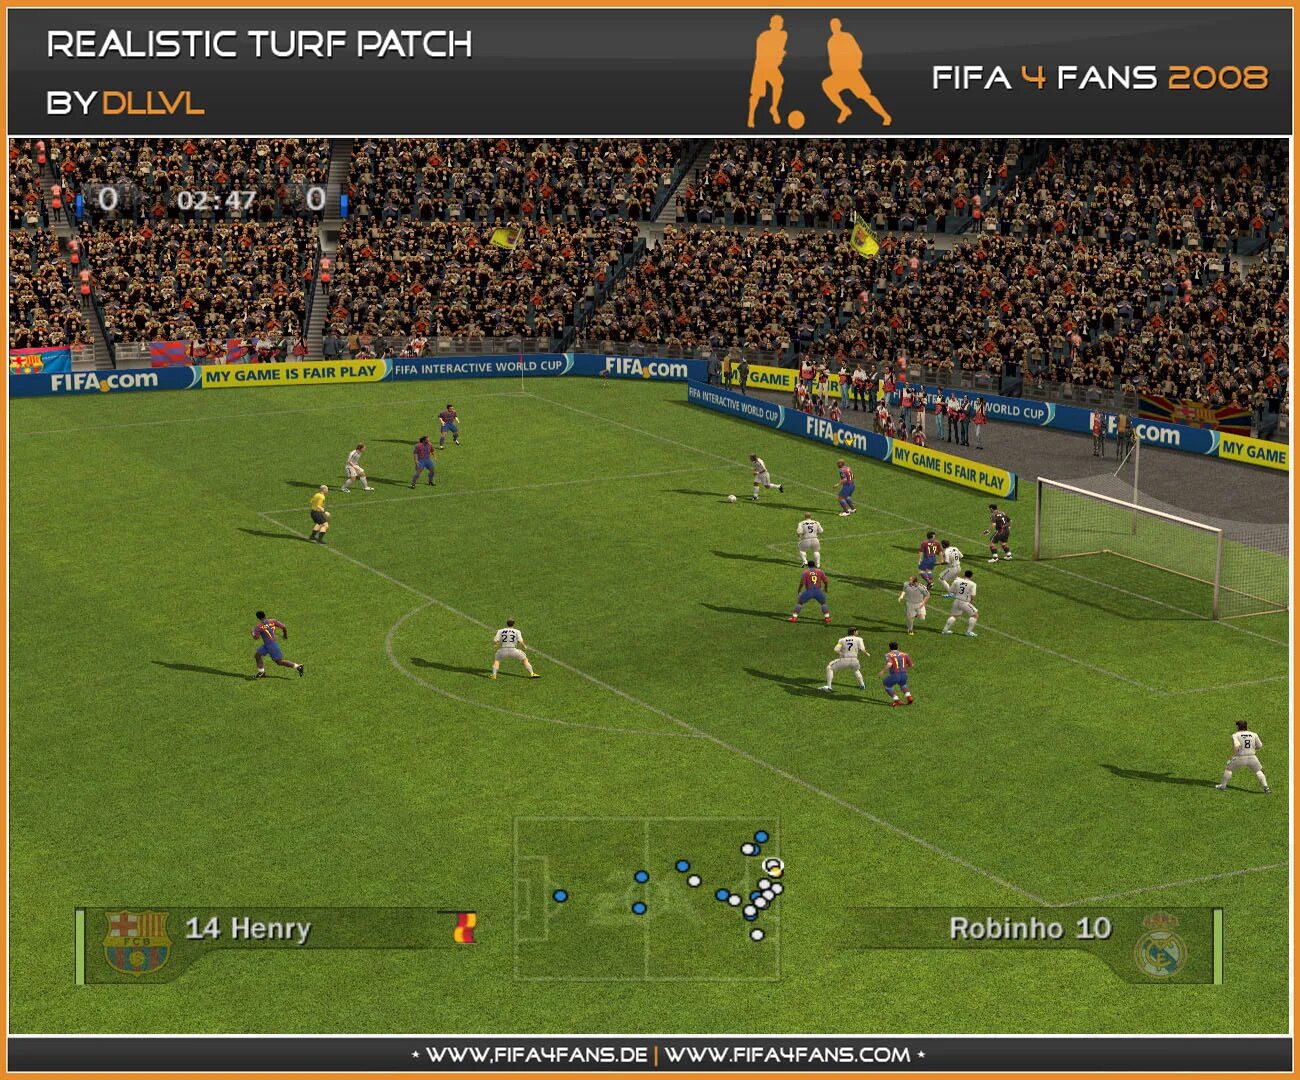 FIFA 2008 Gameplay. FIFA 2008 Patch. FIFA 08. FIFA 2008 РПЛ. Fifa patch